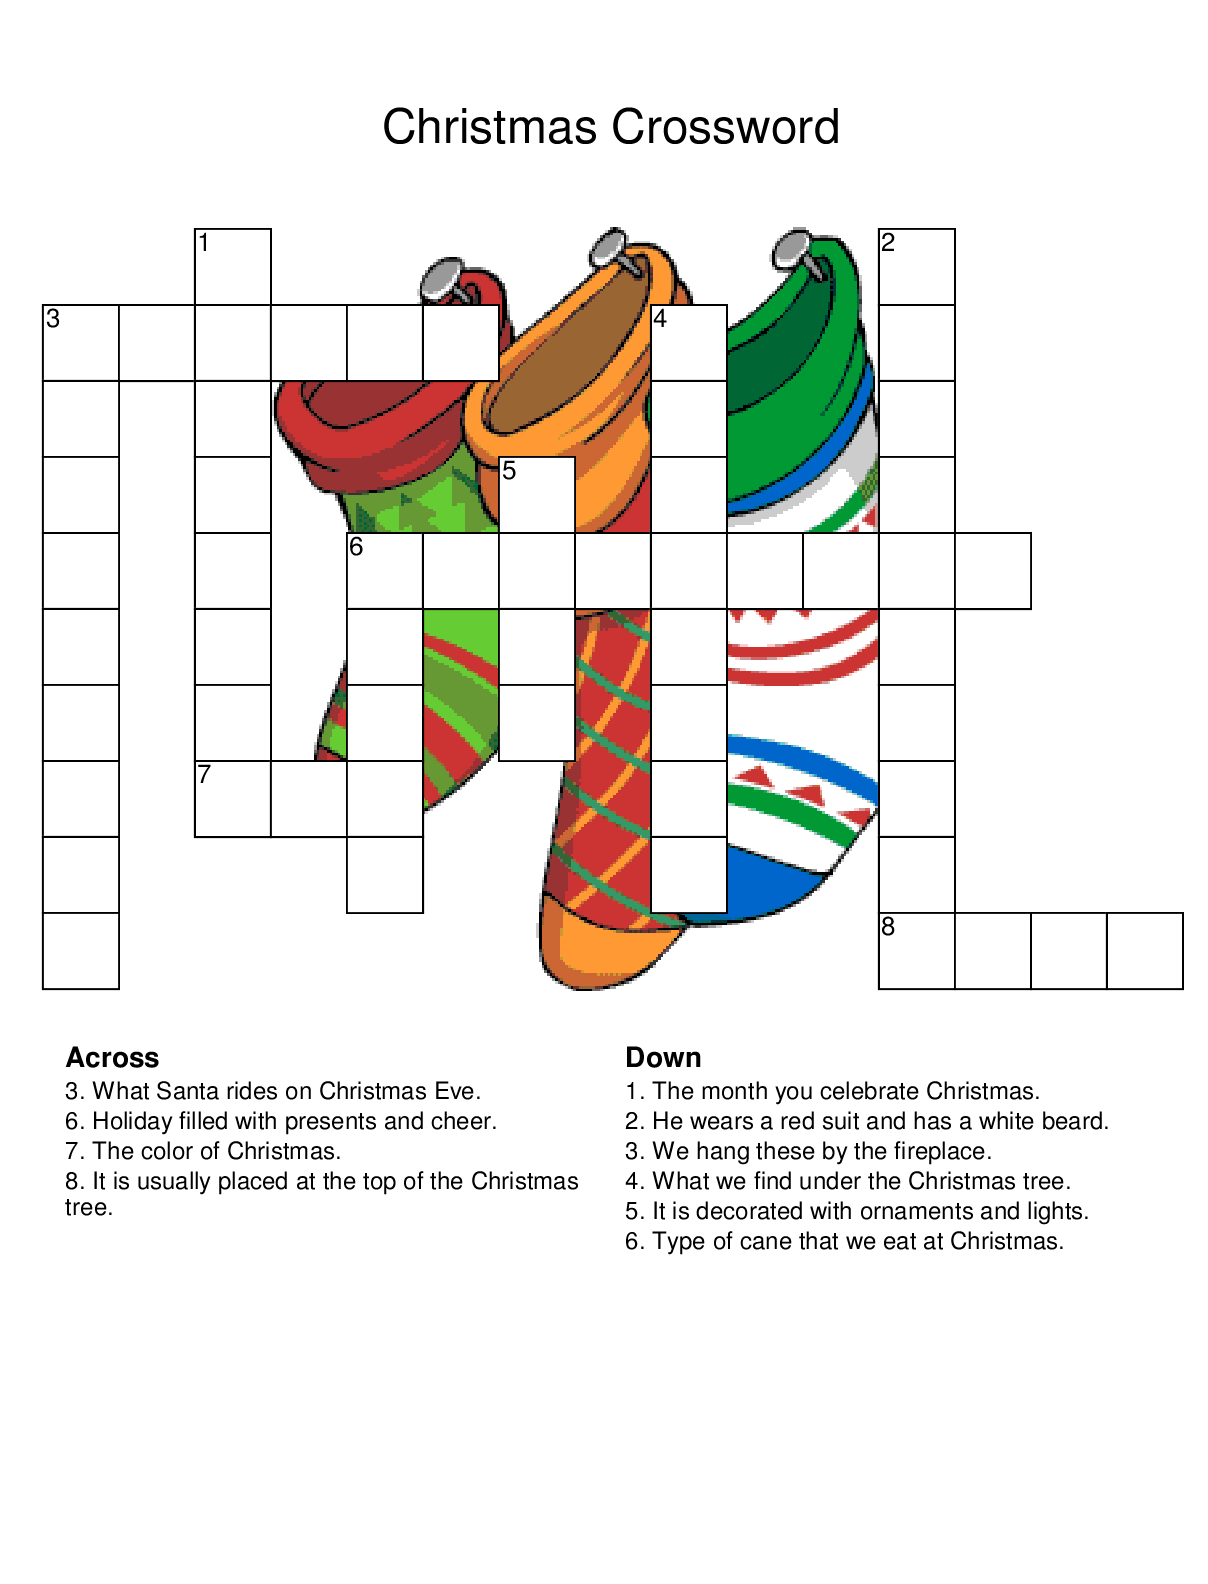 Christmas Crossword Puzzles - Best Coloring Pages For Kids - Free Easy Printable Christmas Crossword Puzzles